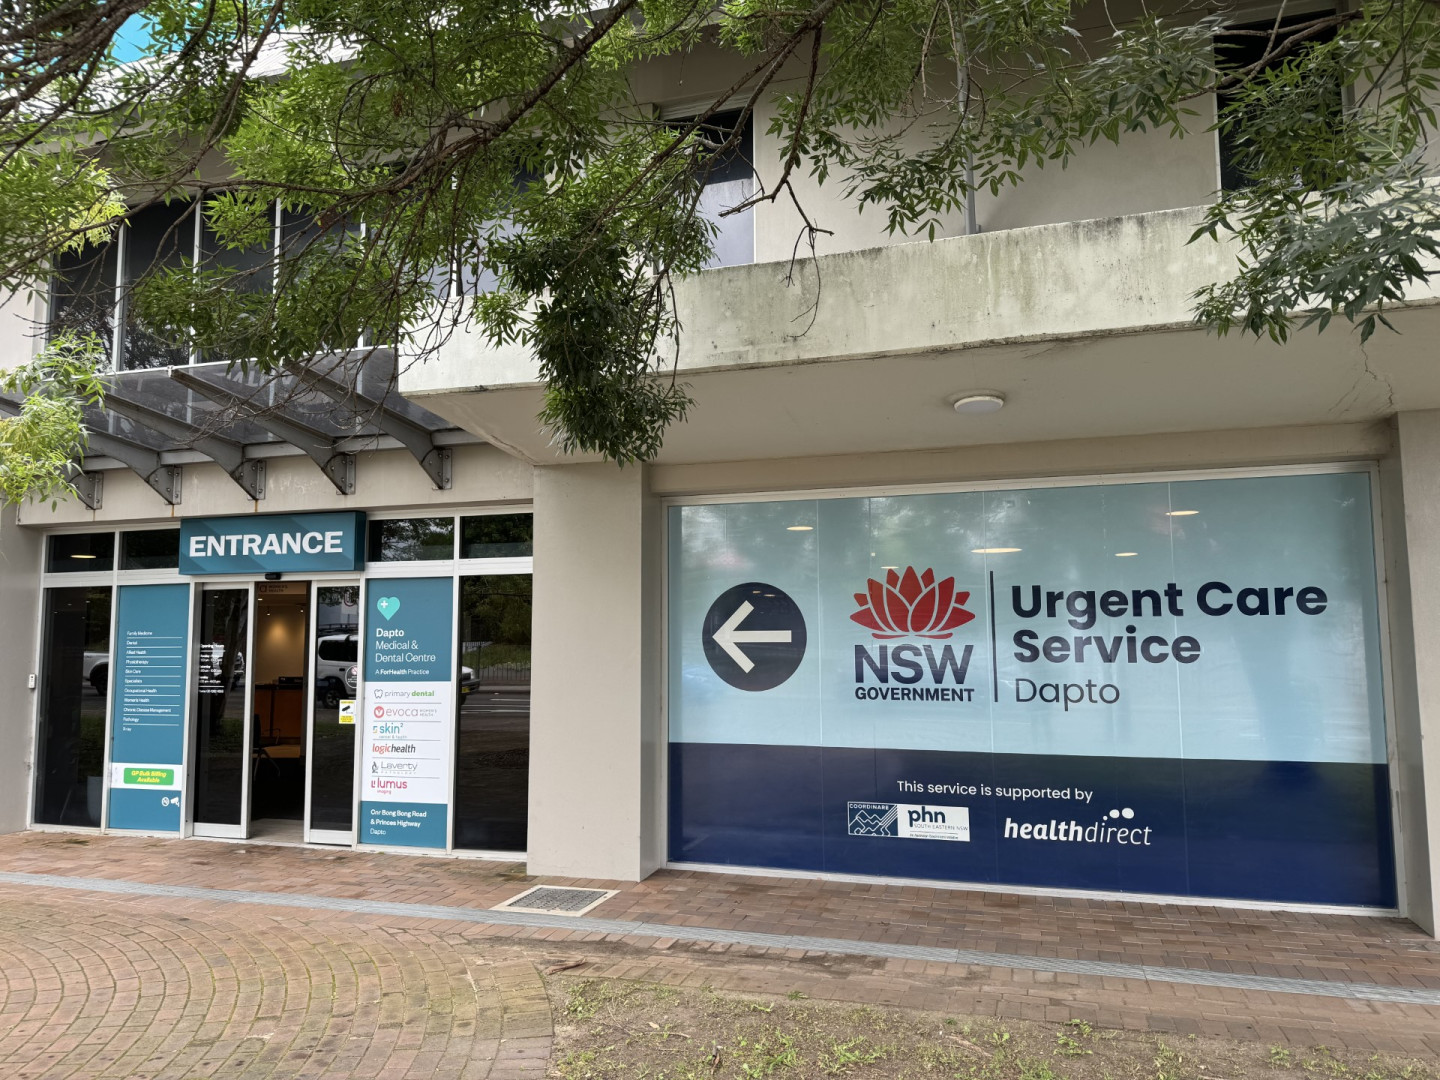 Dapto urgent care service front of the building.